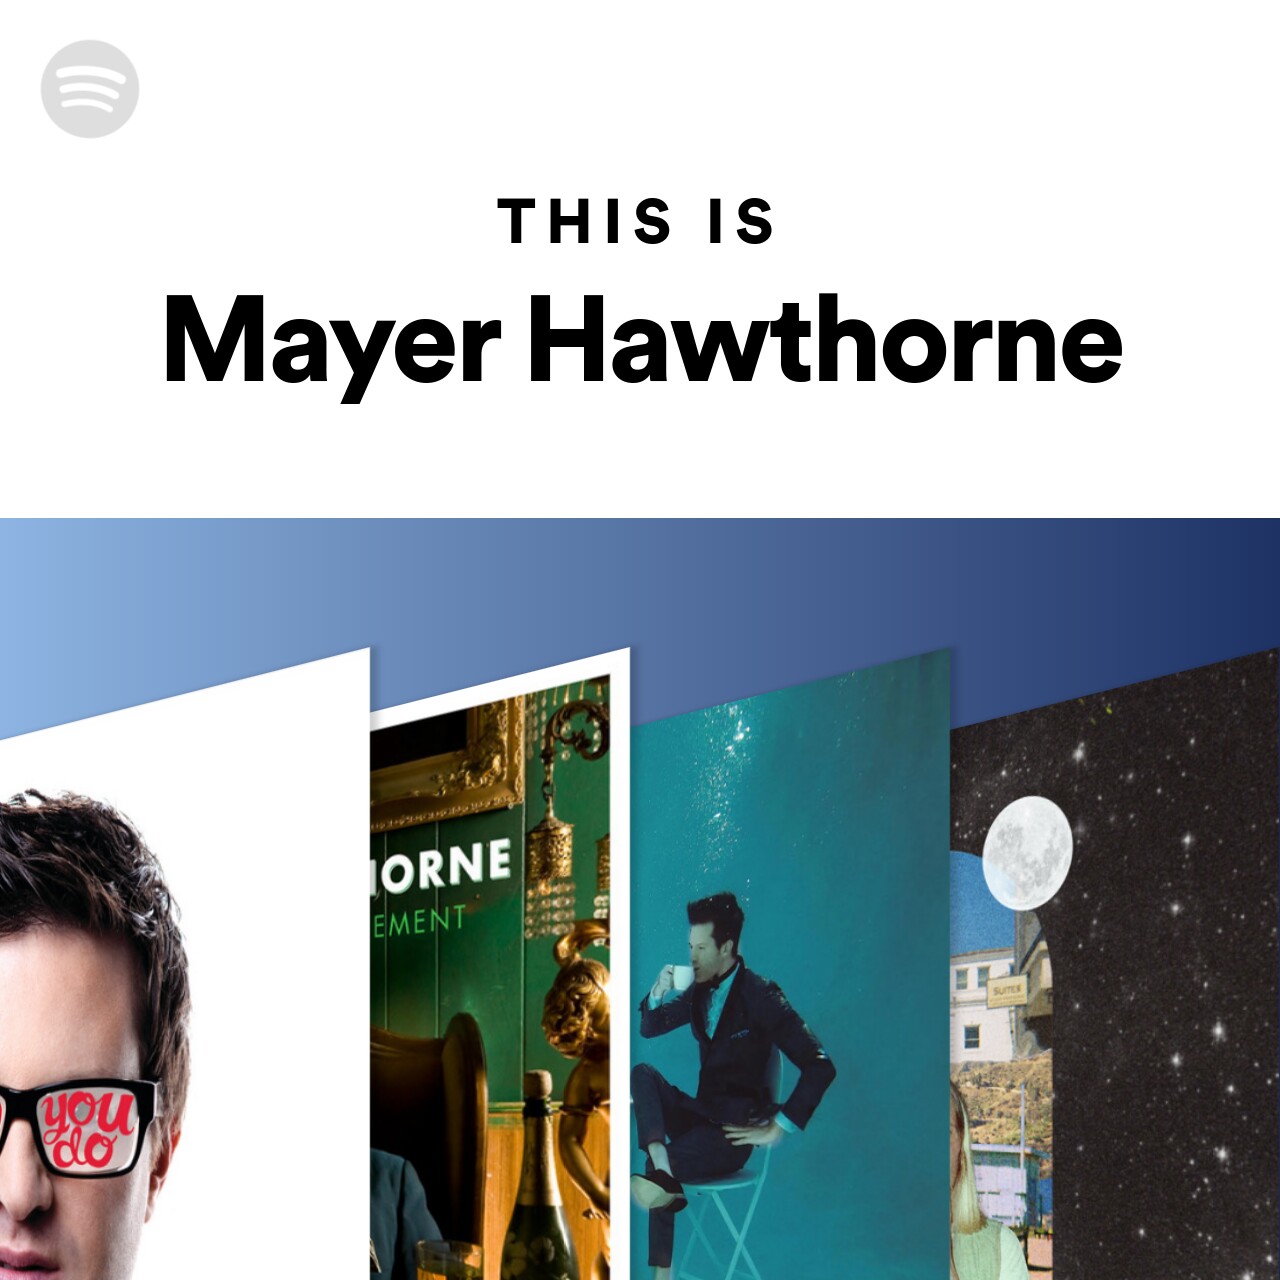 This Is Mayer Hawthorne